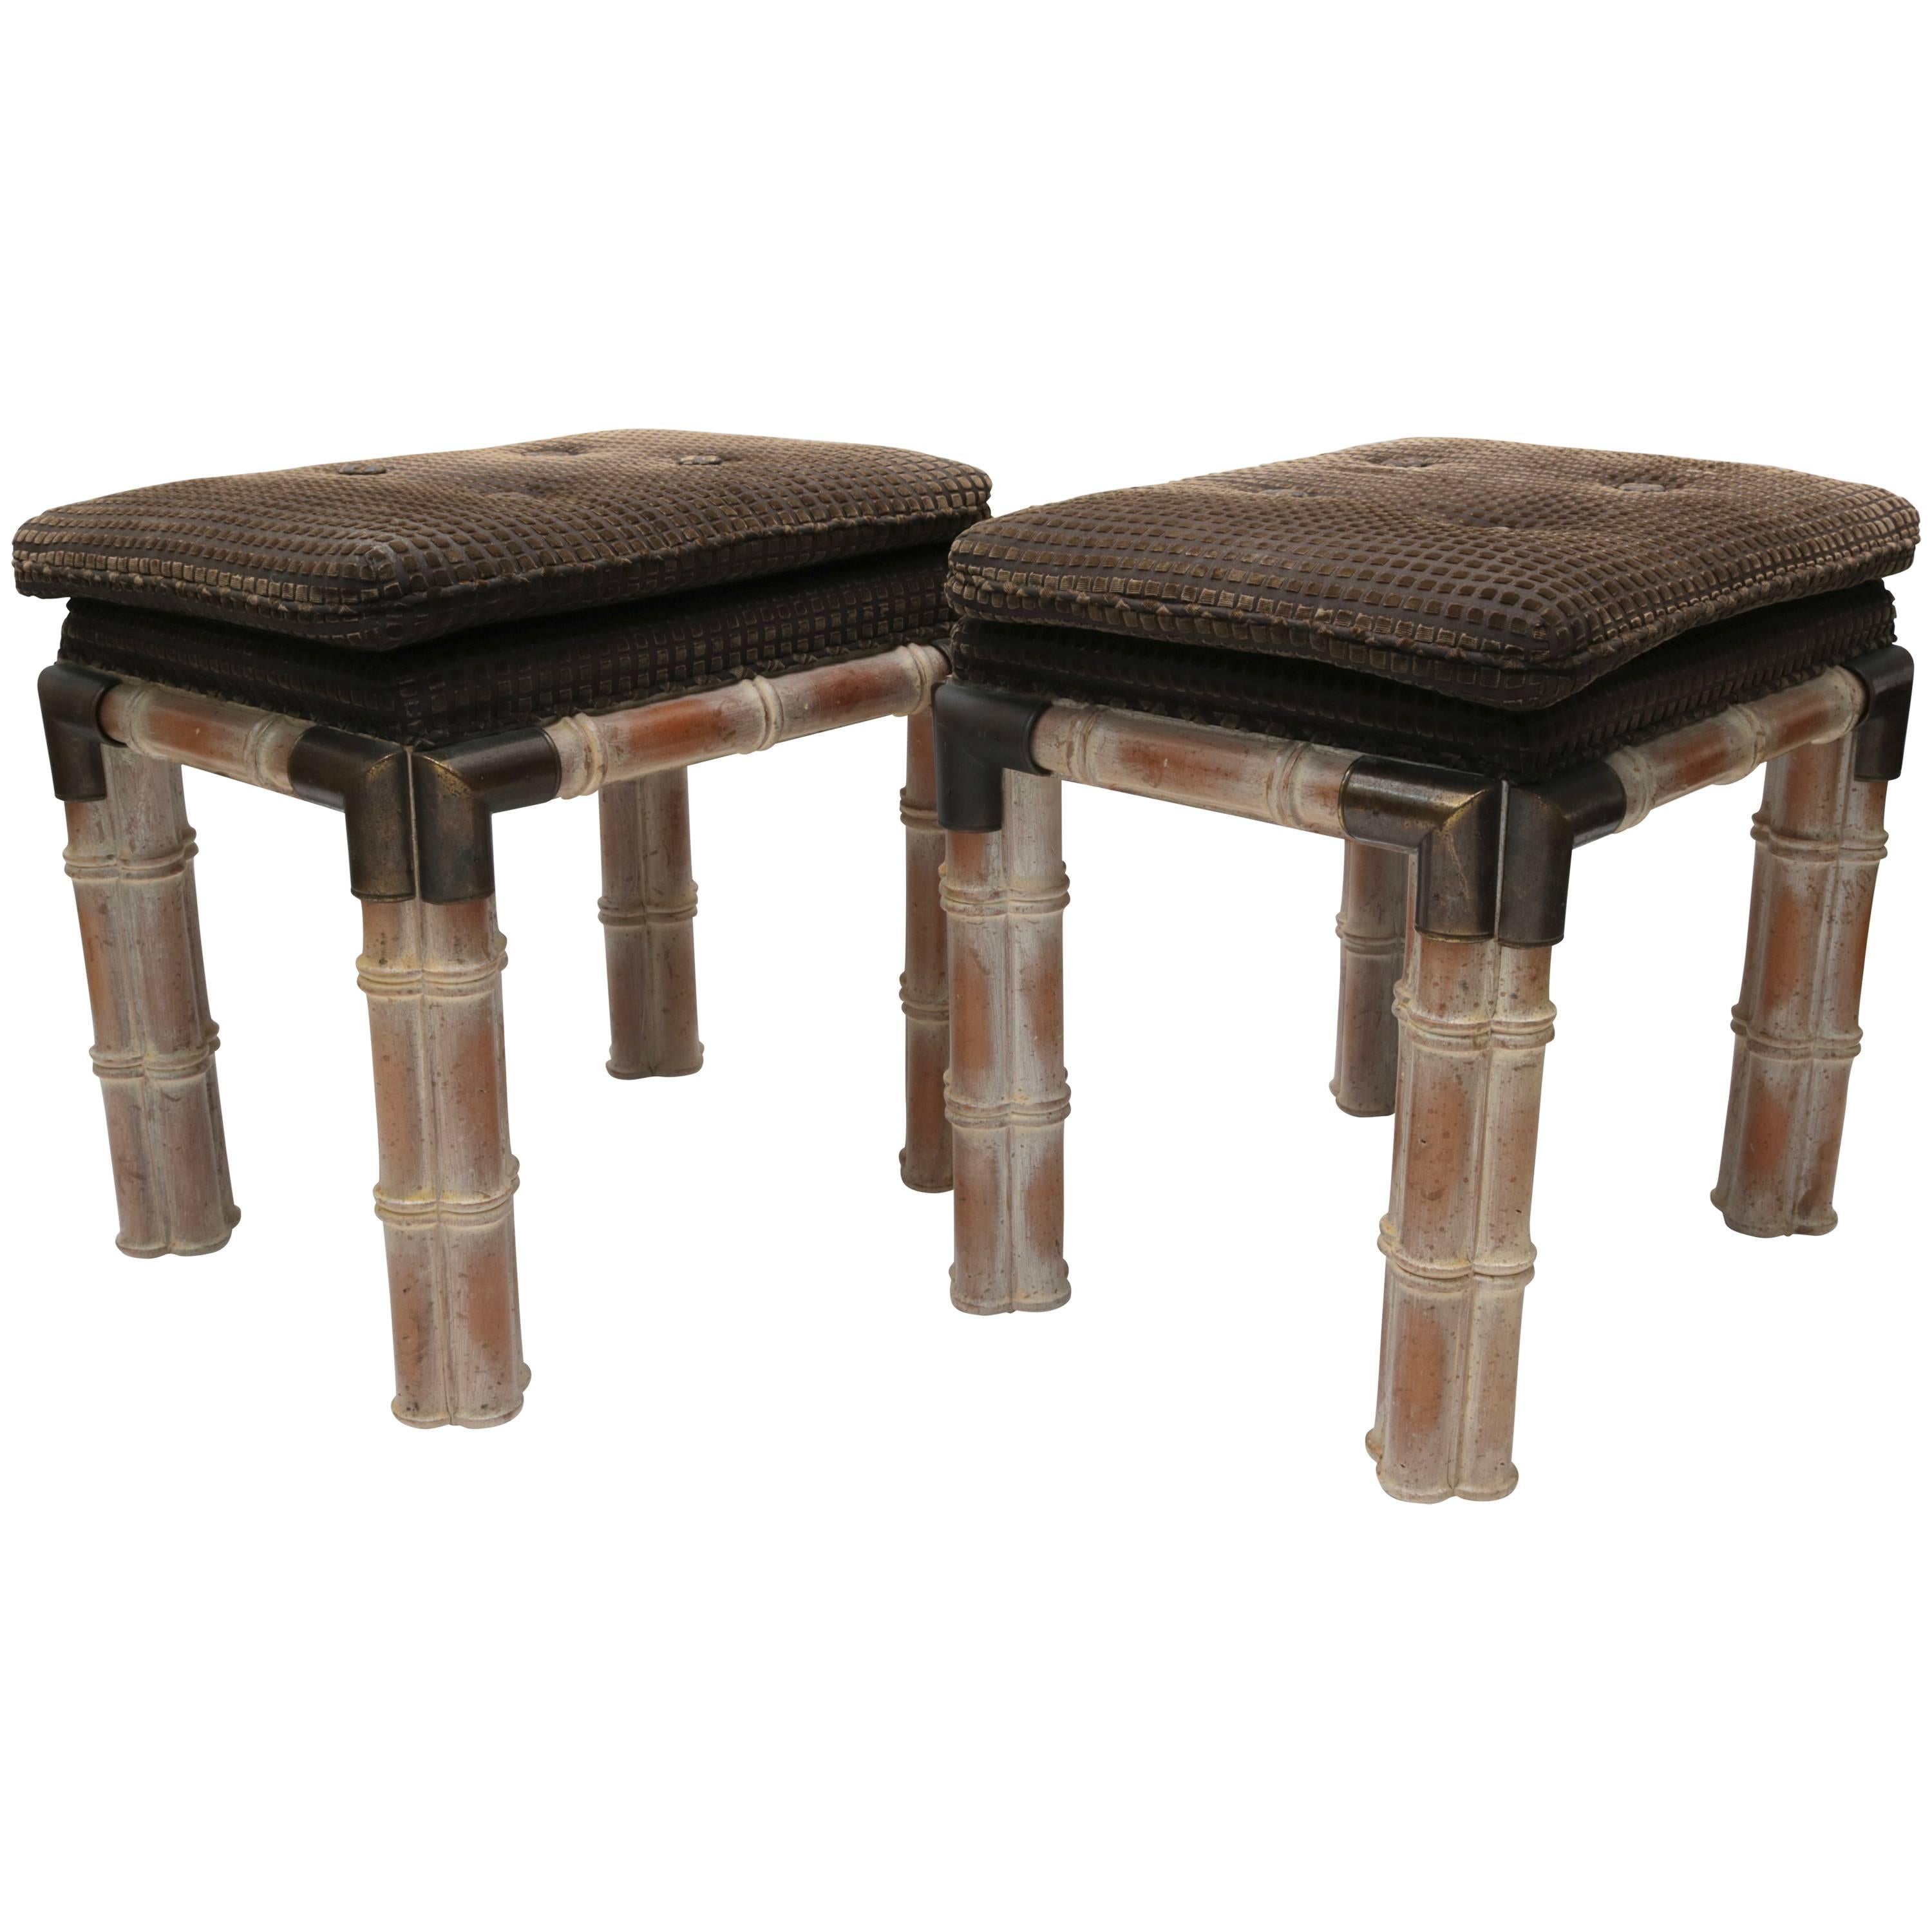 Pair of Sarried Ltd. Style Faux Bamboo Rectangular Benches